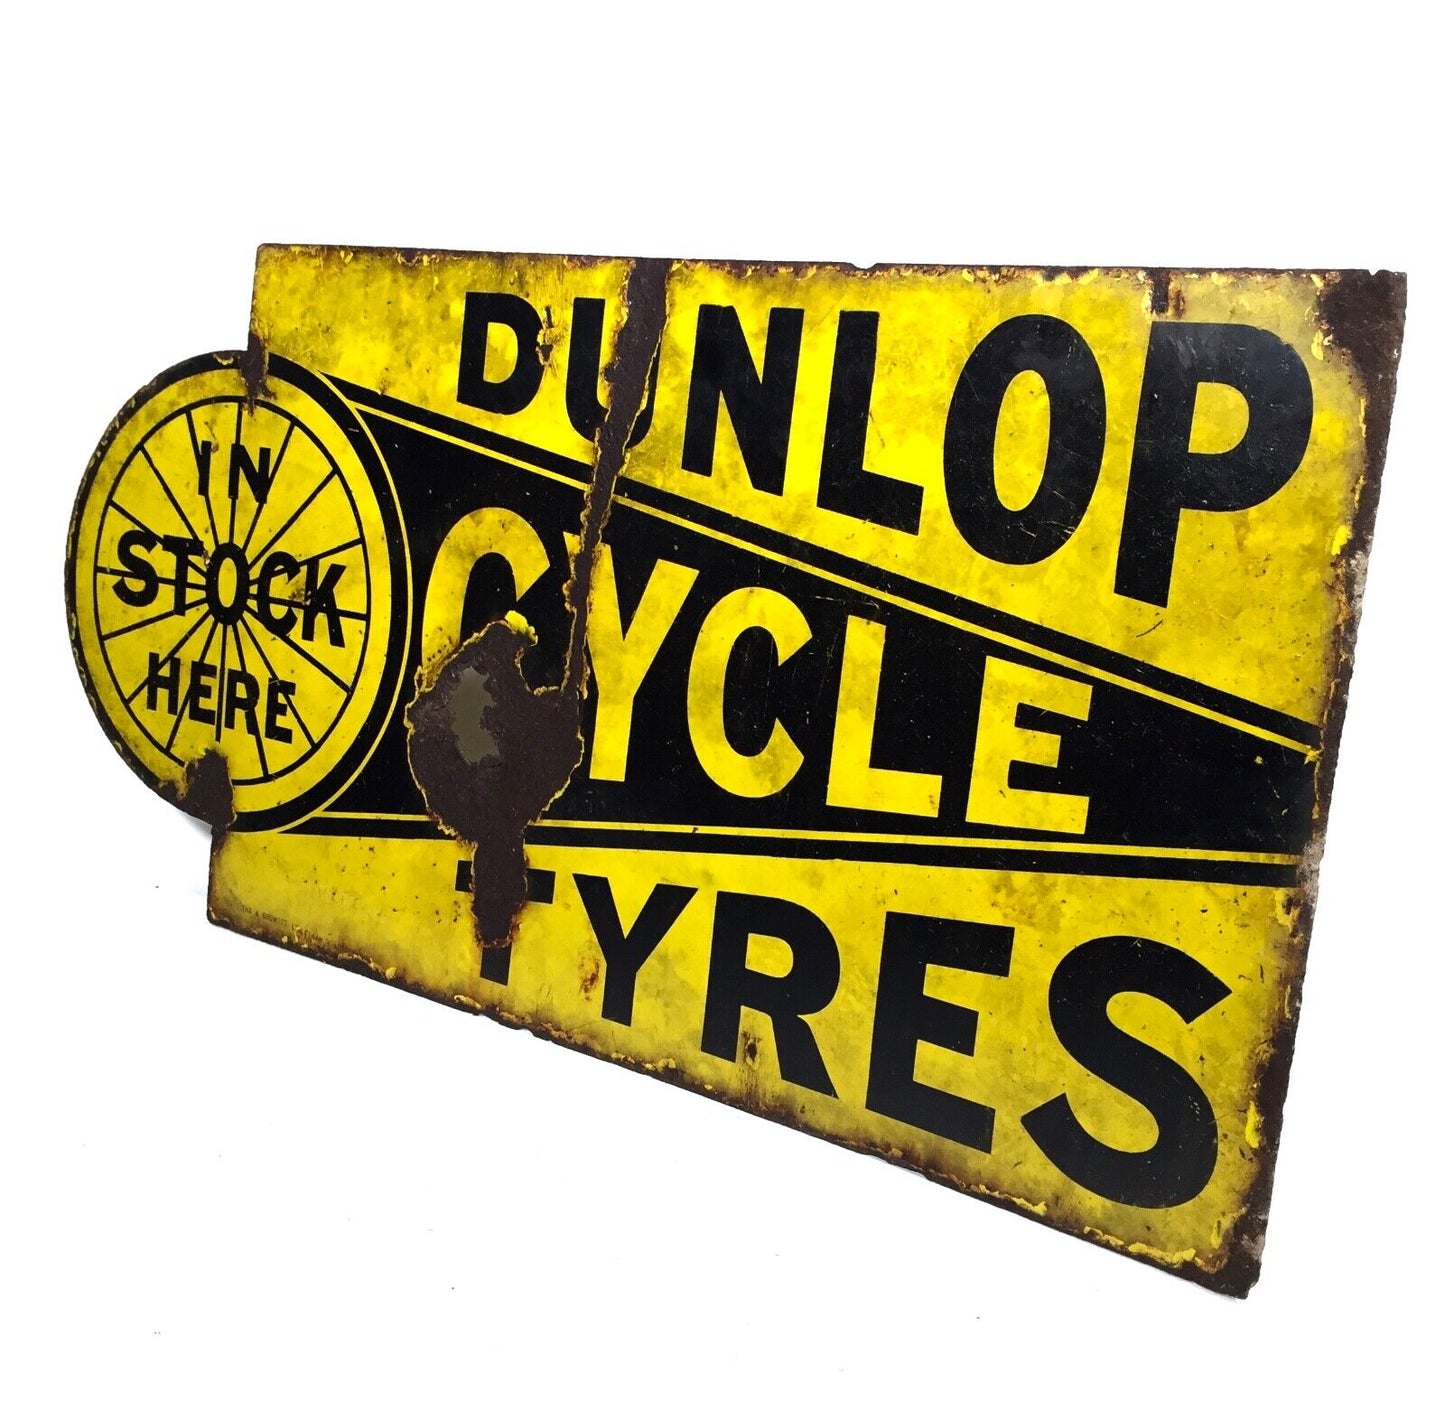 Antique Advertising -  Pictorial Double Sided Enamel Sign for Dunlop Cycle Tyres